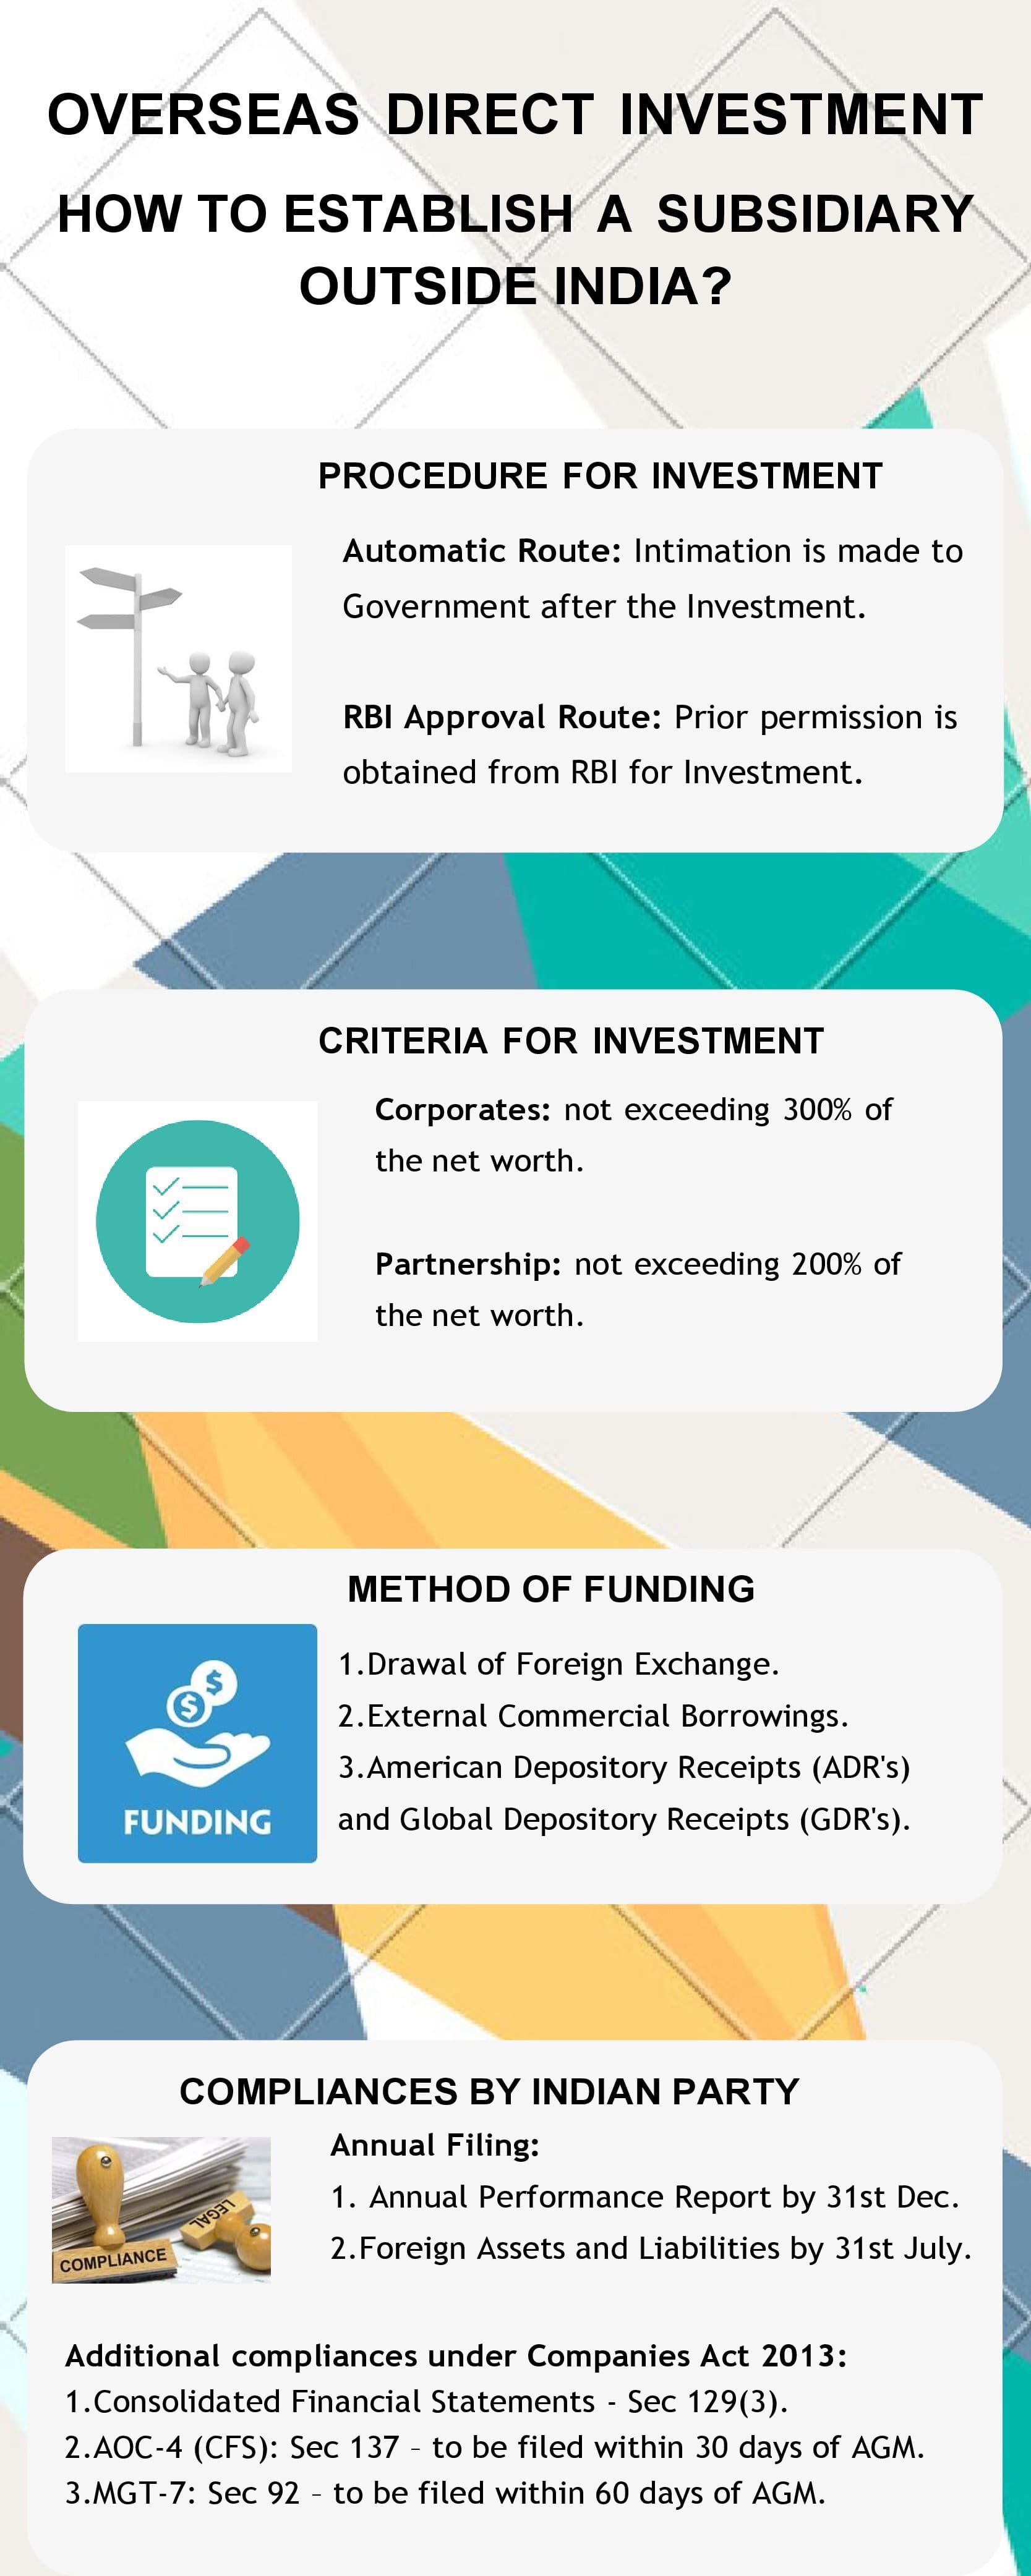 WHAT IS OVERSEAS DIRECT INVESTMENT (ODI): HOW TO ESTABLISH A SUBSIDIARY OUTSIDE INDIA?